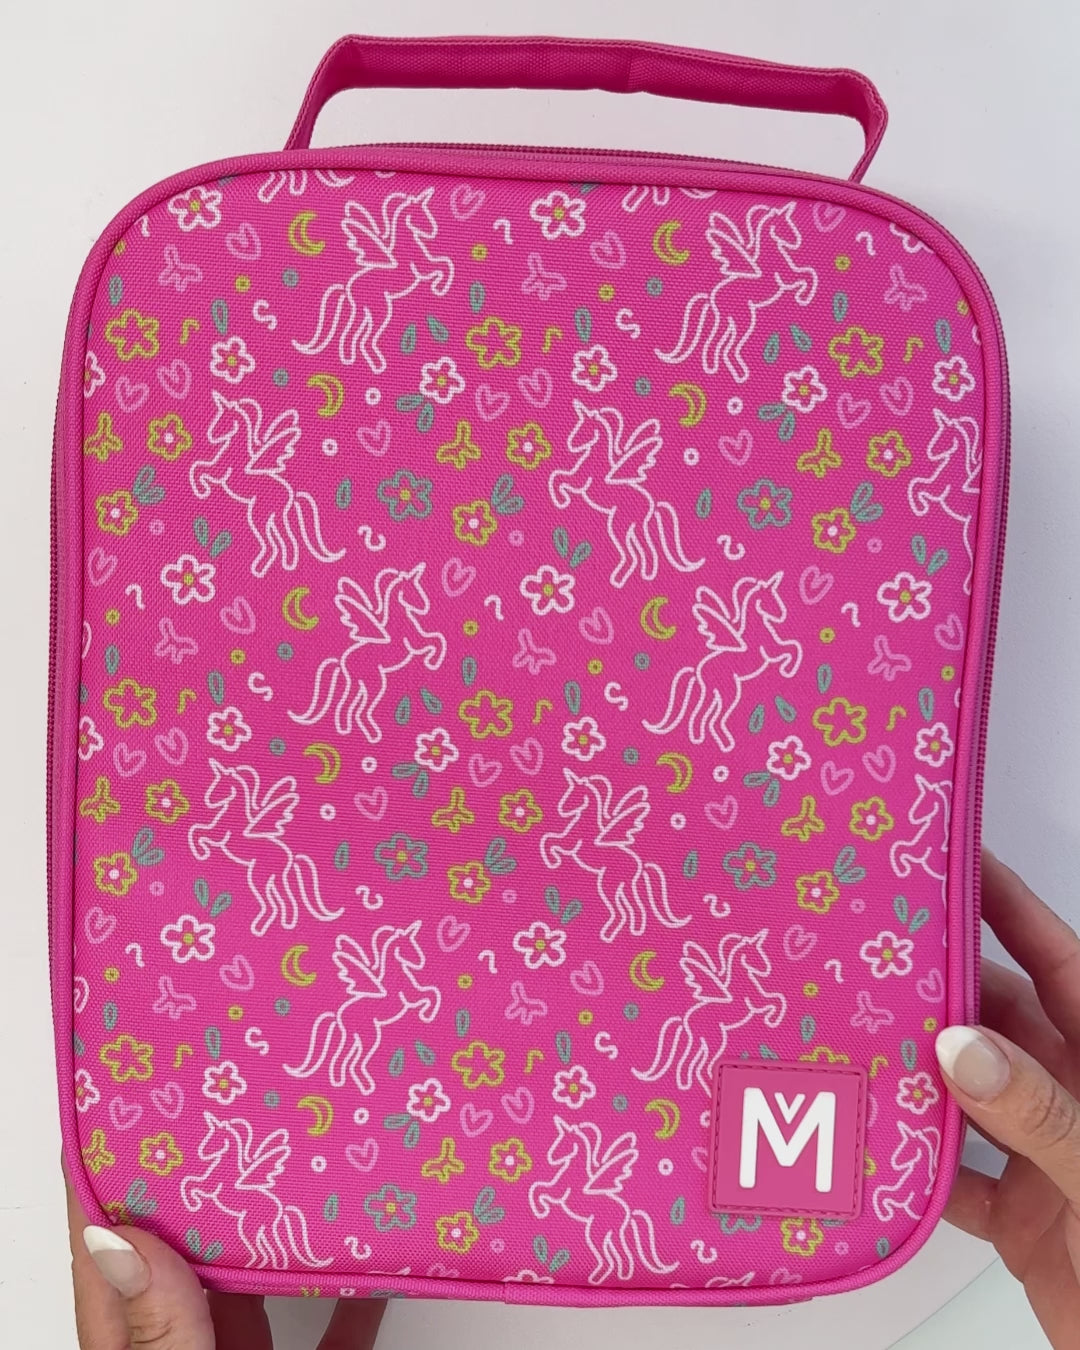 PRE-ORDER MontiiCo Large Insulated Lunch Bag - Unicorn Magic